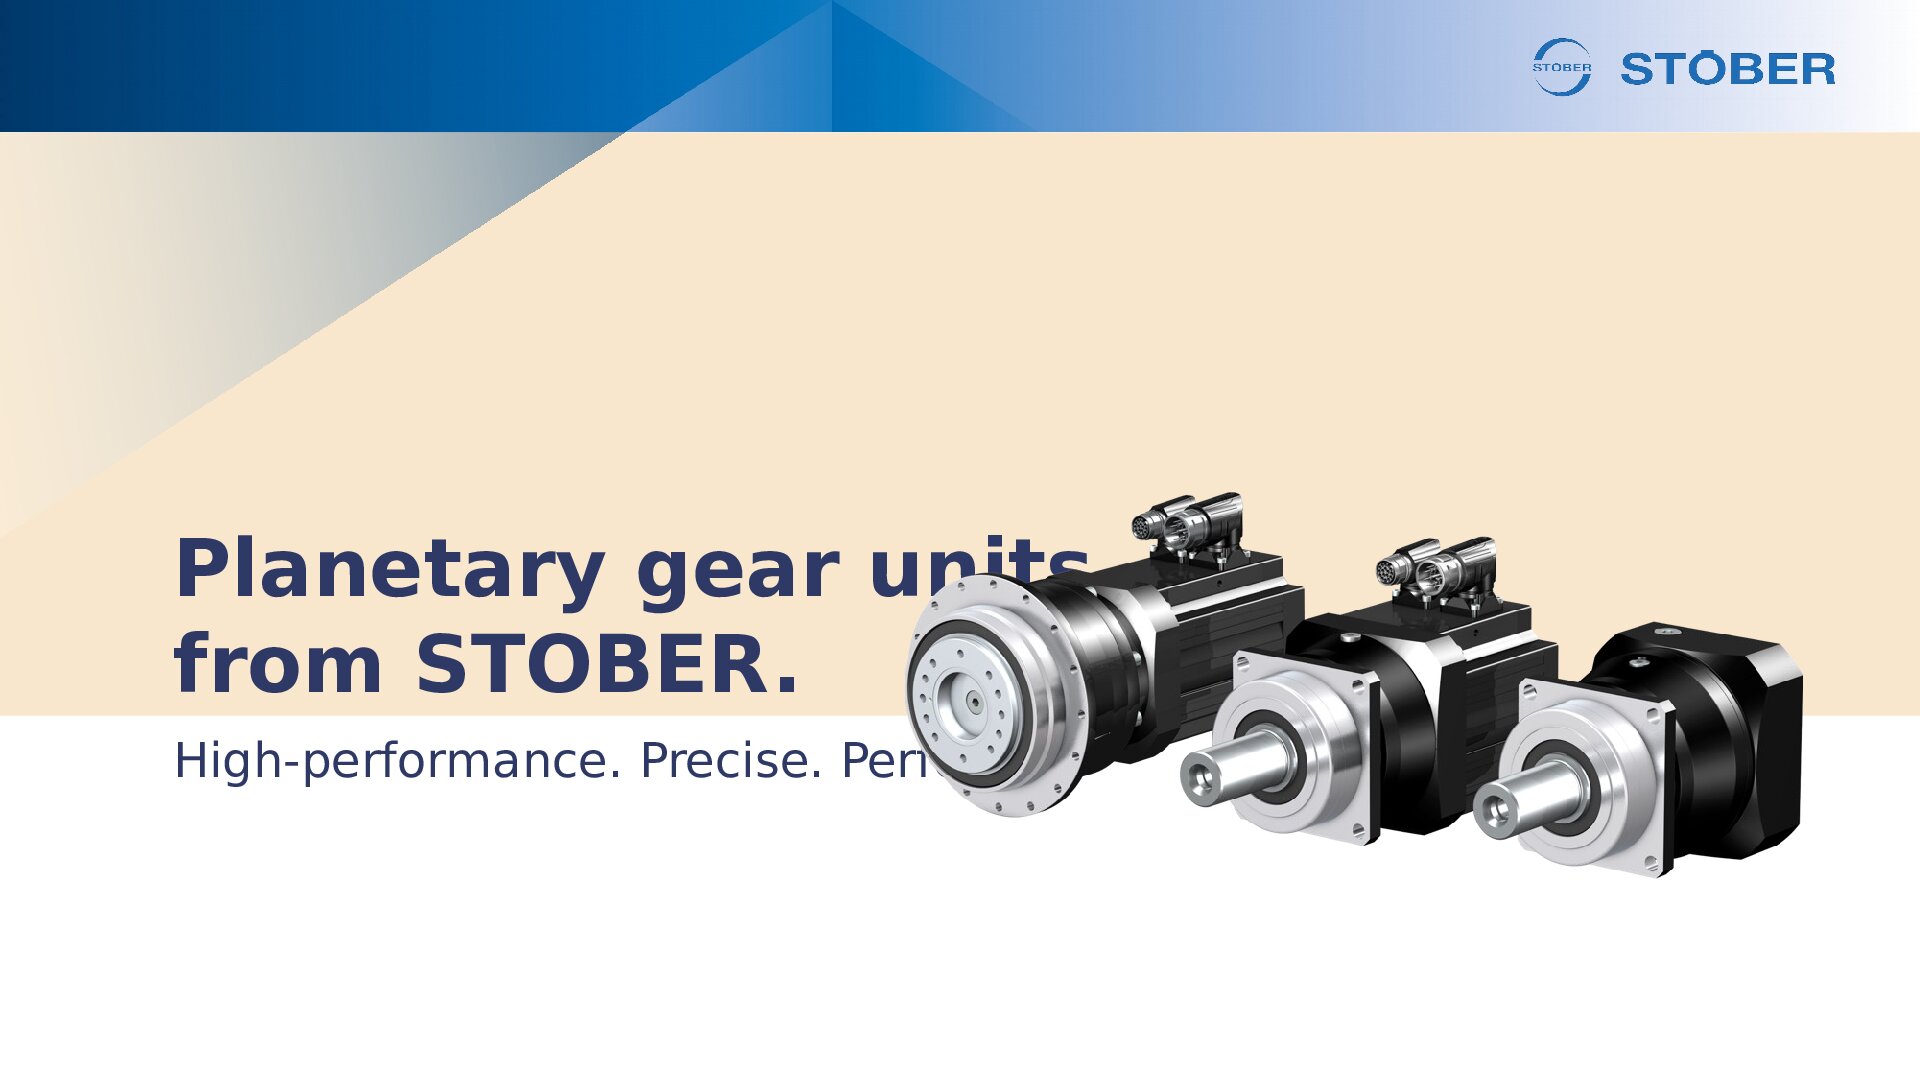 Planetary gear units from STOBER